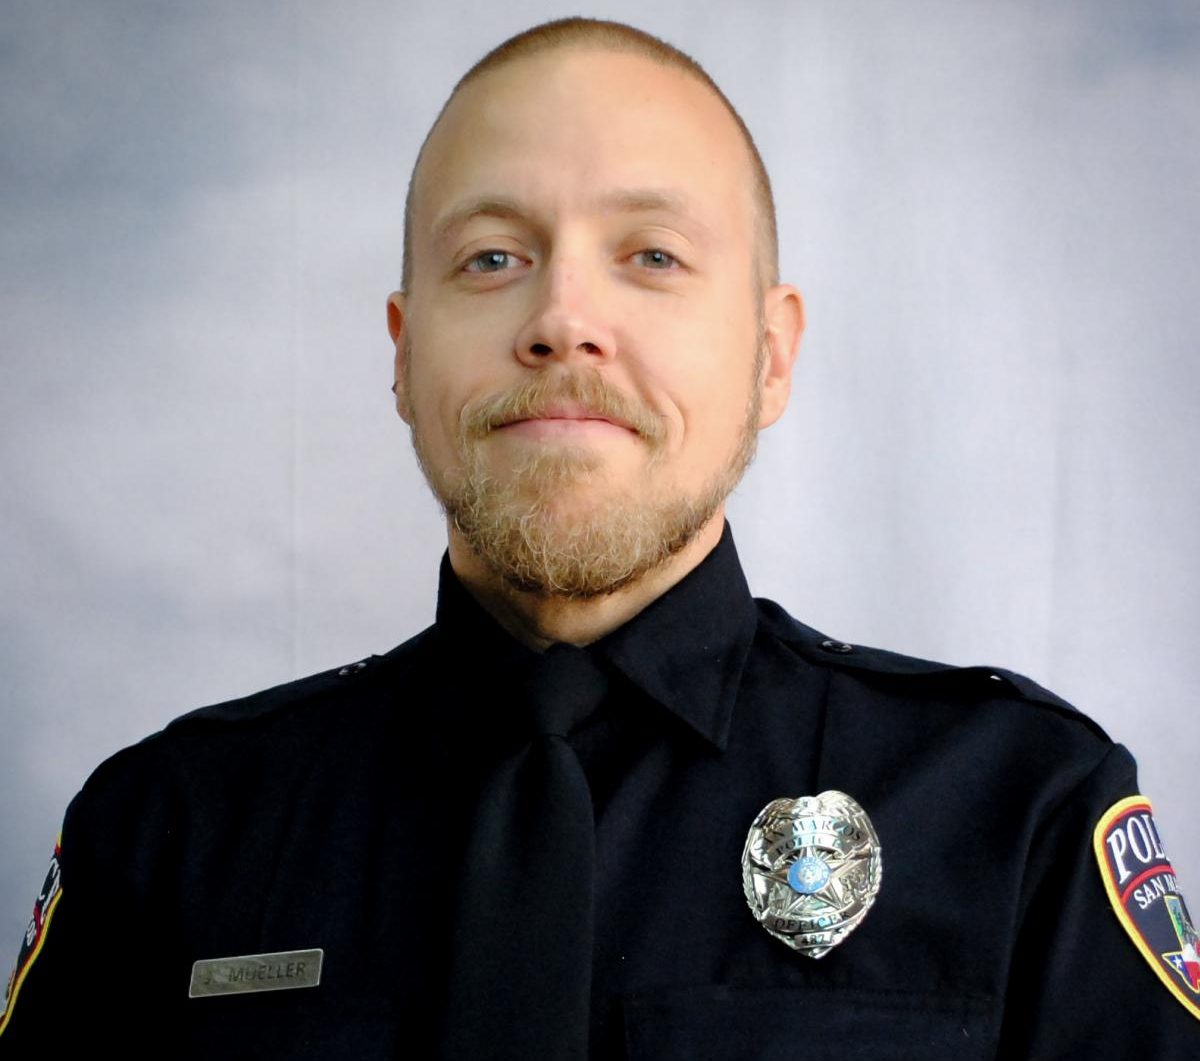 San Marcos Police Department officer Justin Mueller was shot while responding to a domestic disturbance call, Saturday, April 18, 2020, at the Twin Lakes Villa Apartments in San Marcos.